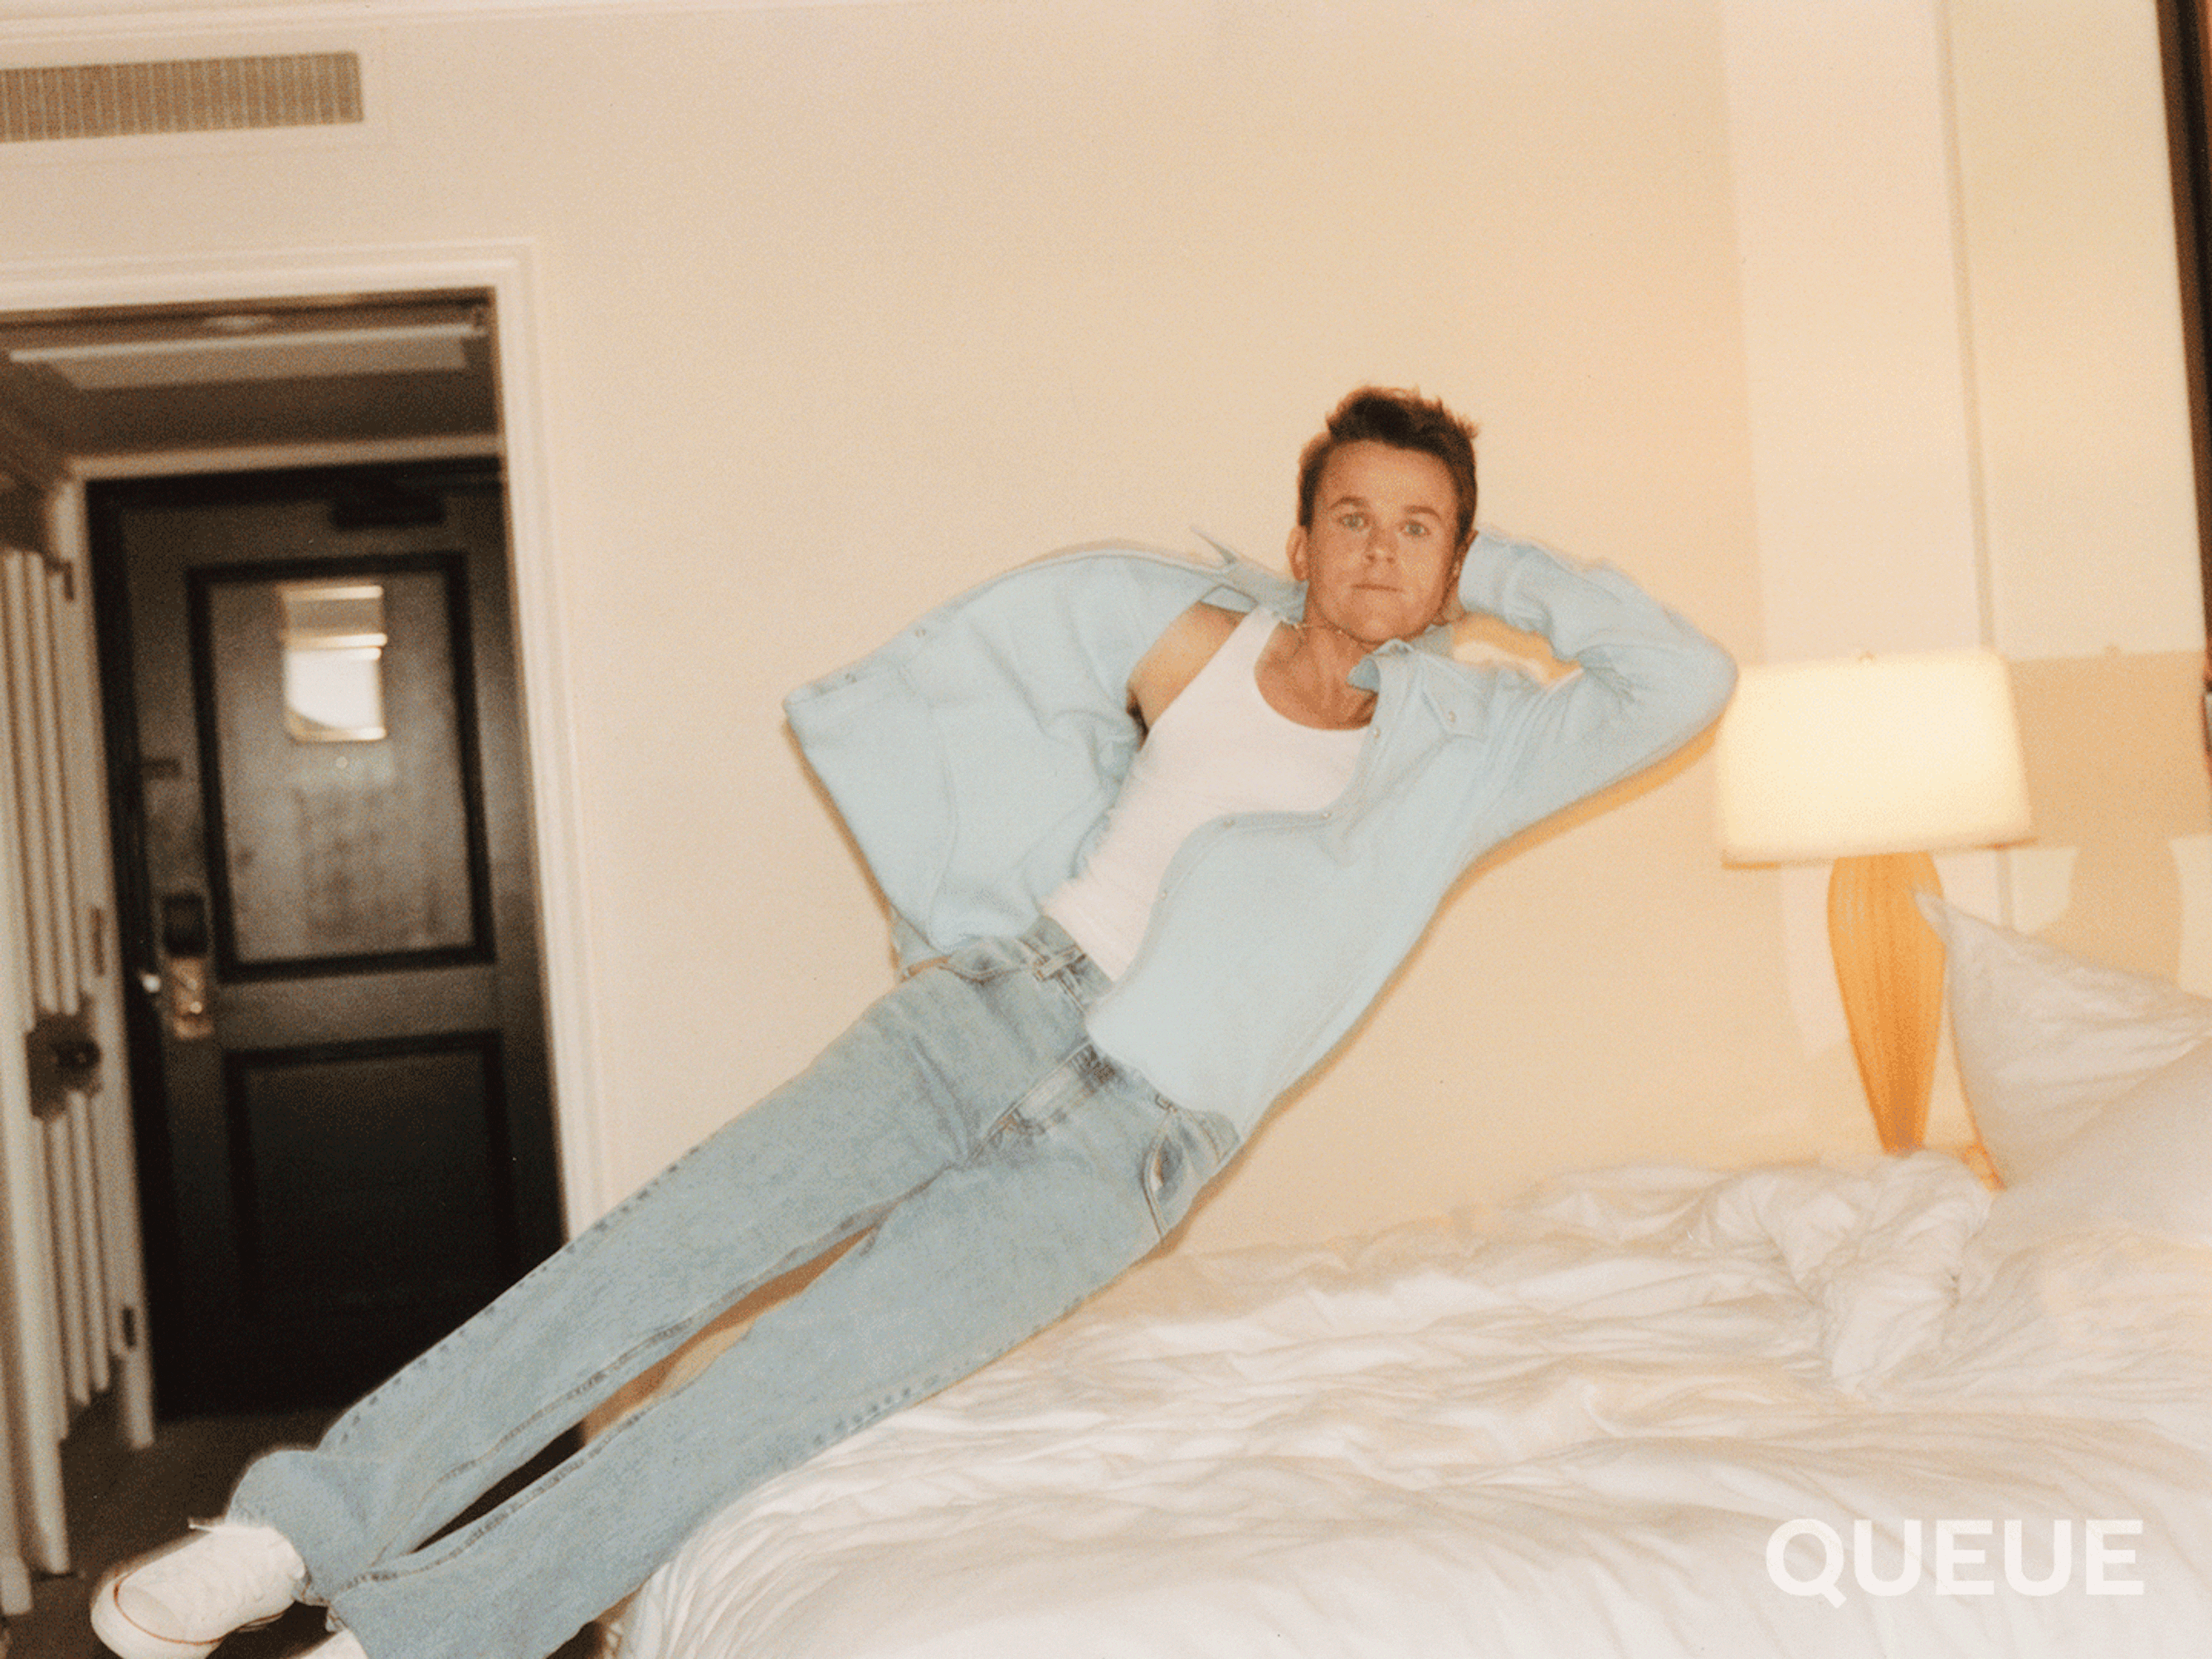 John Owen Lowe flops onto a hotel bed in this short gif. He wears light-wash jeans and a long-sleeved light blue denim shirt over a white tank top. 